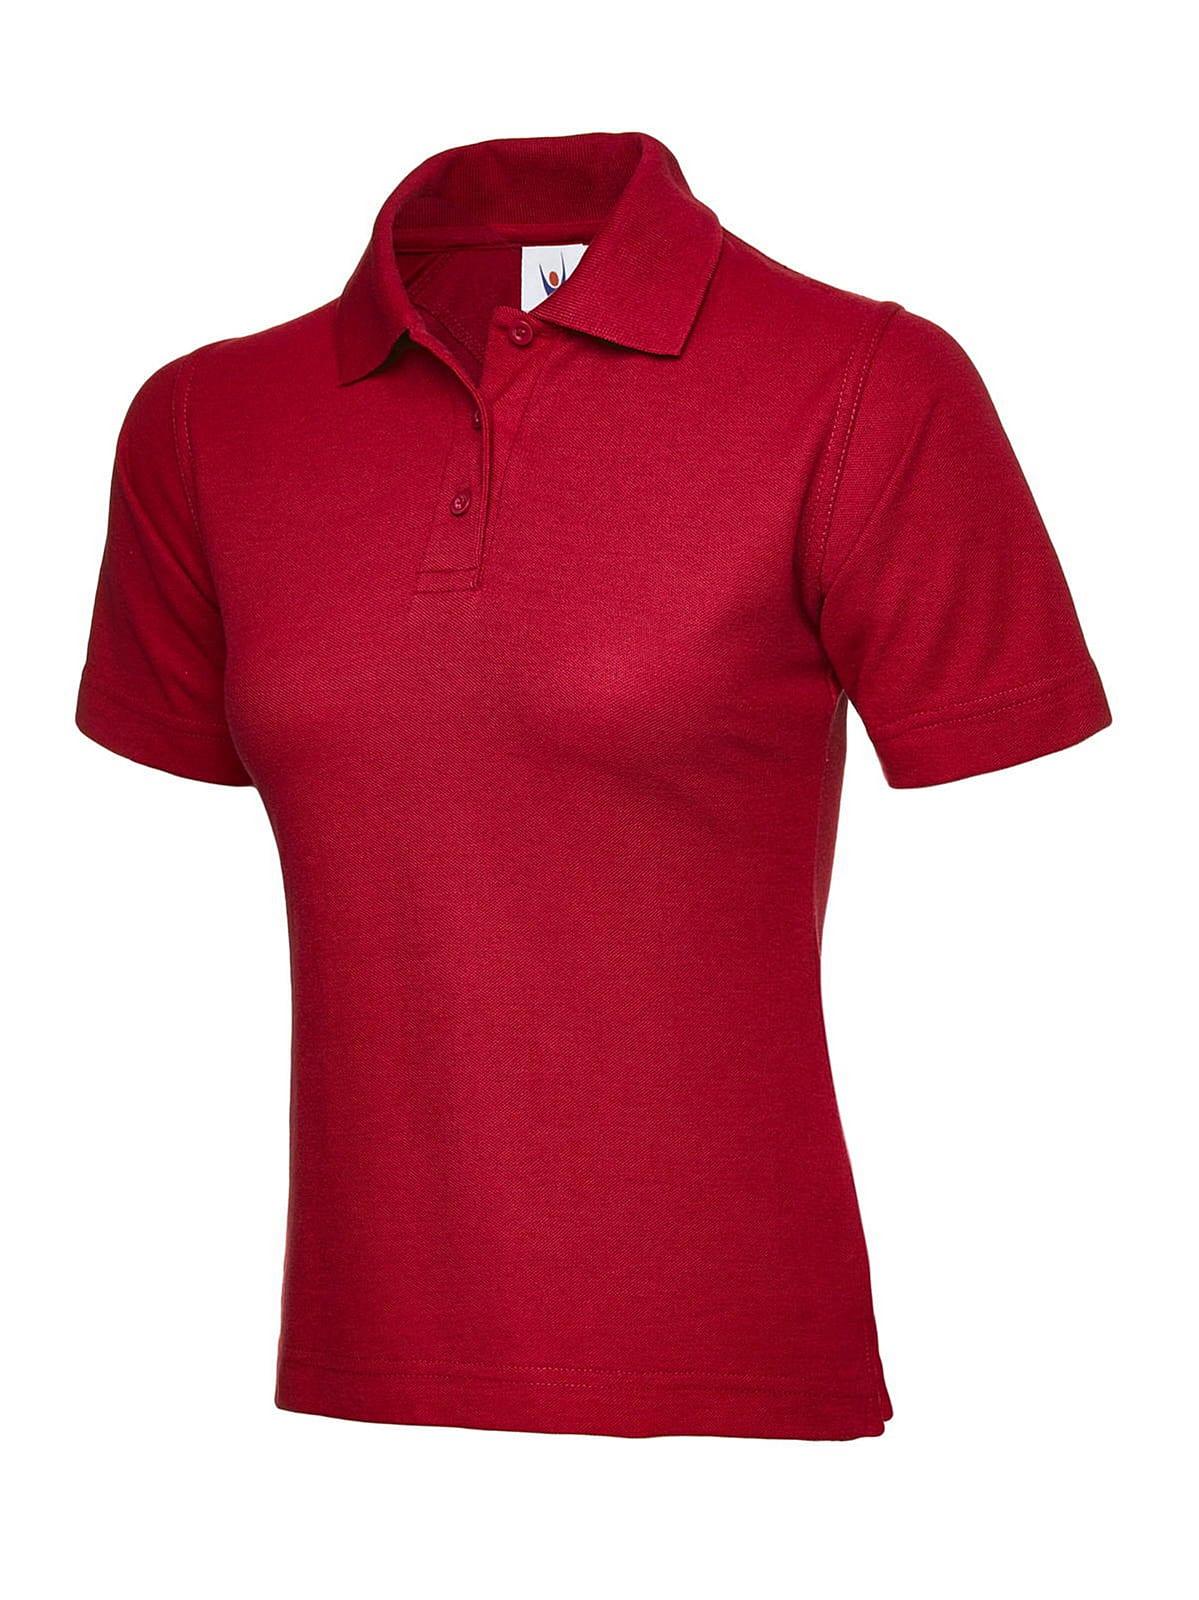 Uneek 220GSM Womens Polo Shirt in Red (Product Code: UC106)